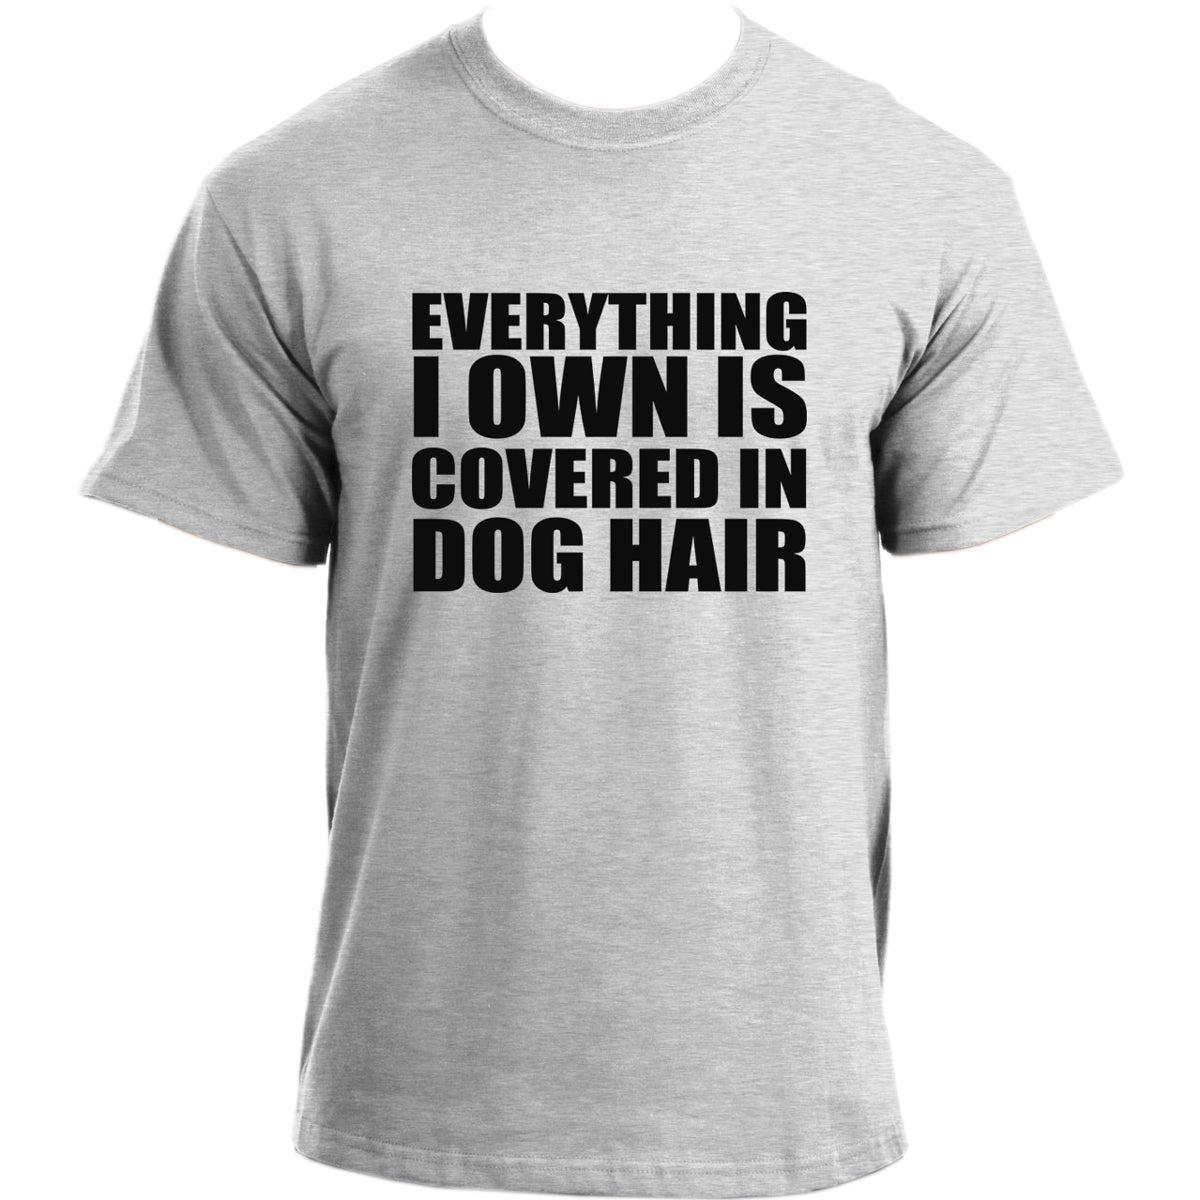 Everything I own is covered in dog hair T-shirt I Dog Owner TShirt I Dog Dad Funny T-shirts For Men